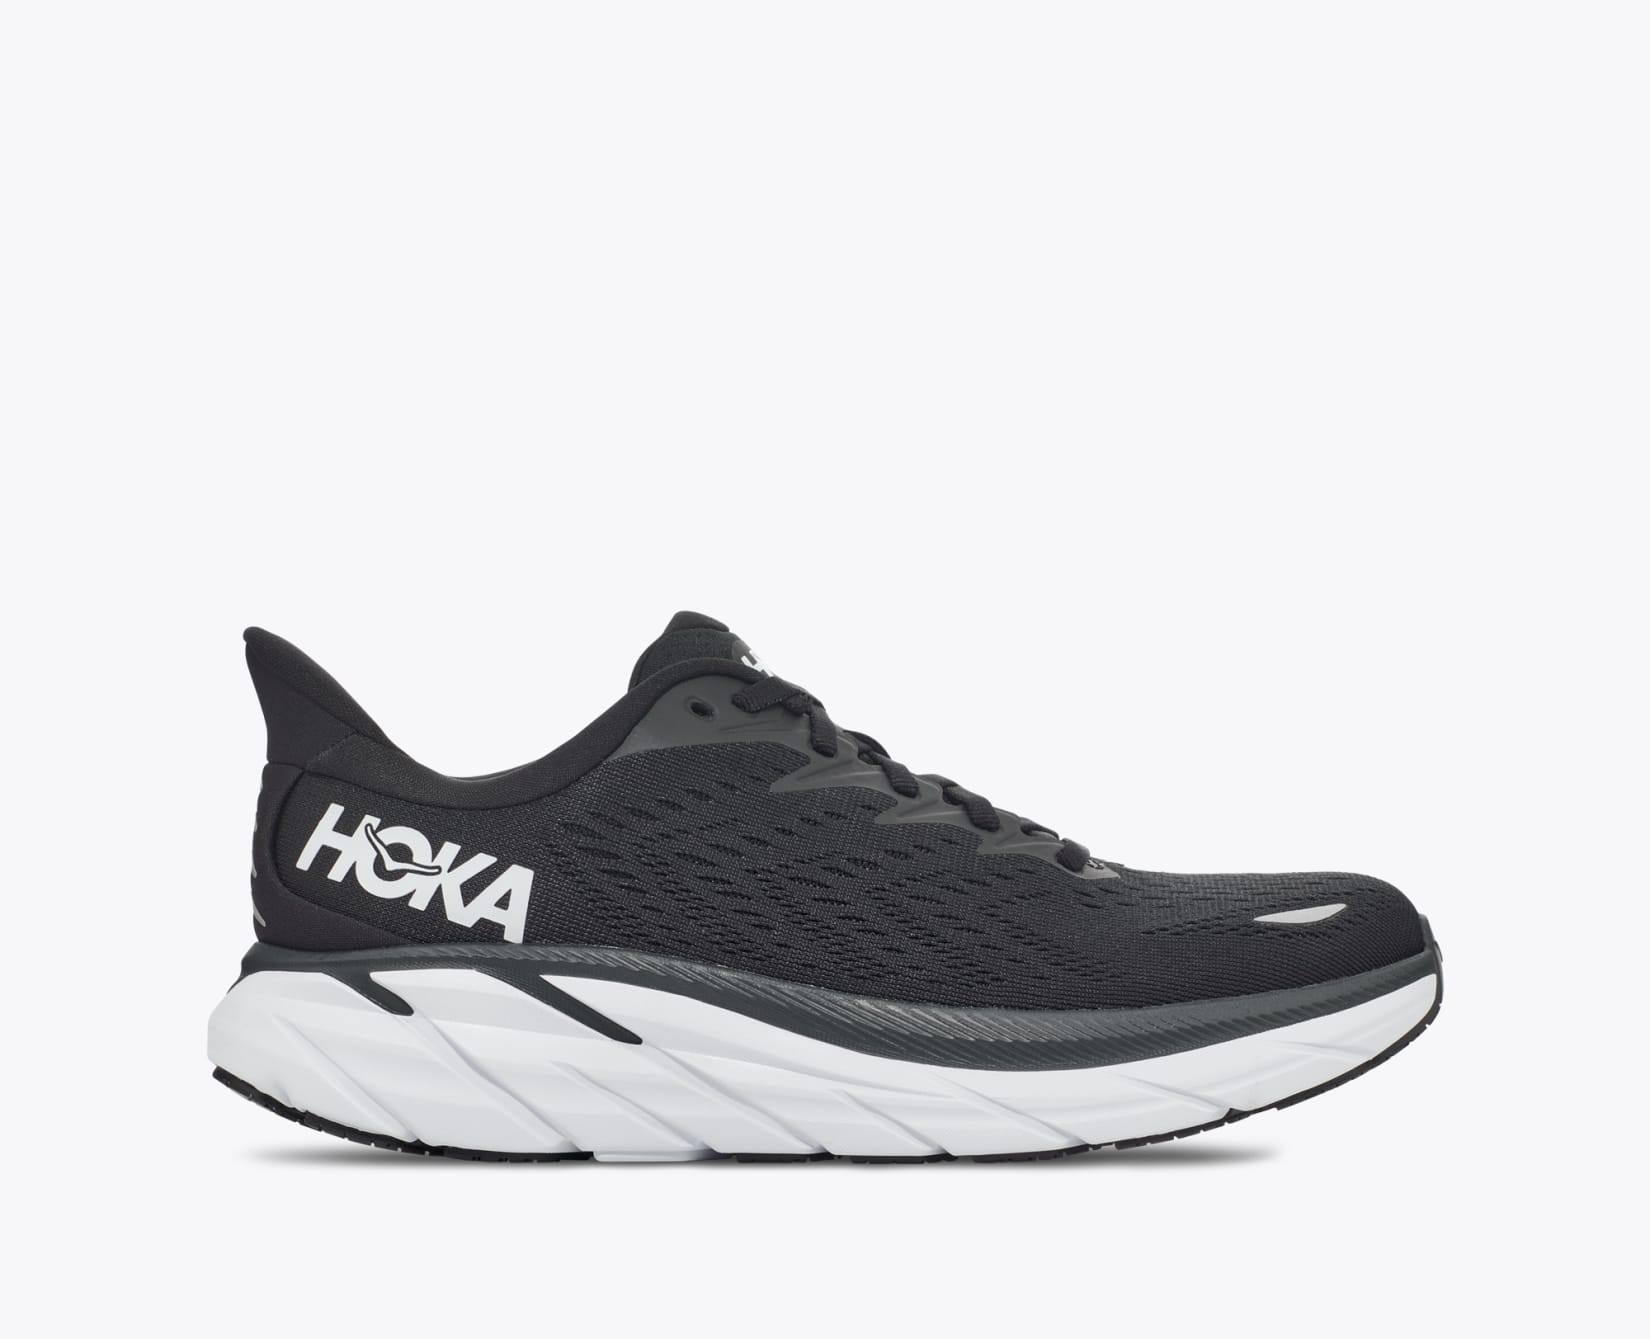 Hoka One One Clifton 5 mens running shoes size 10 black